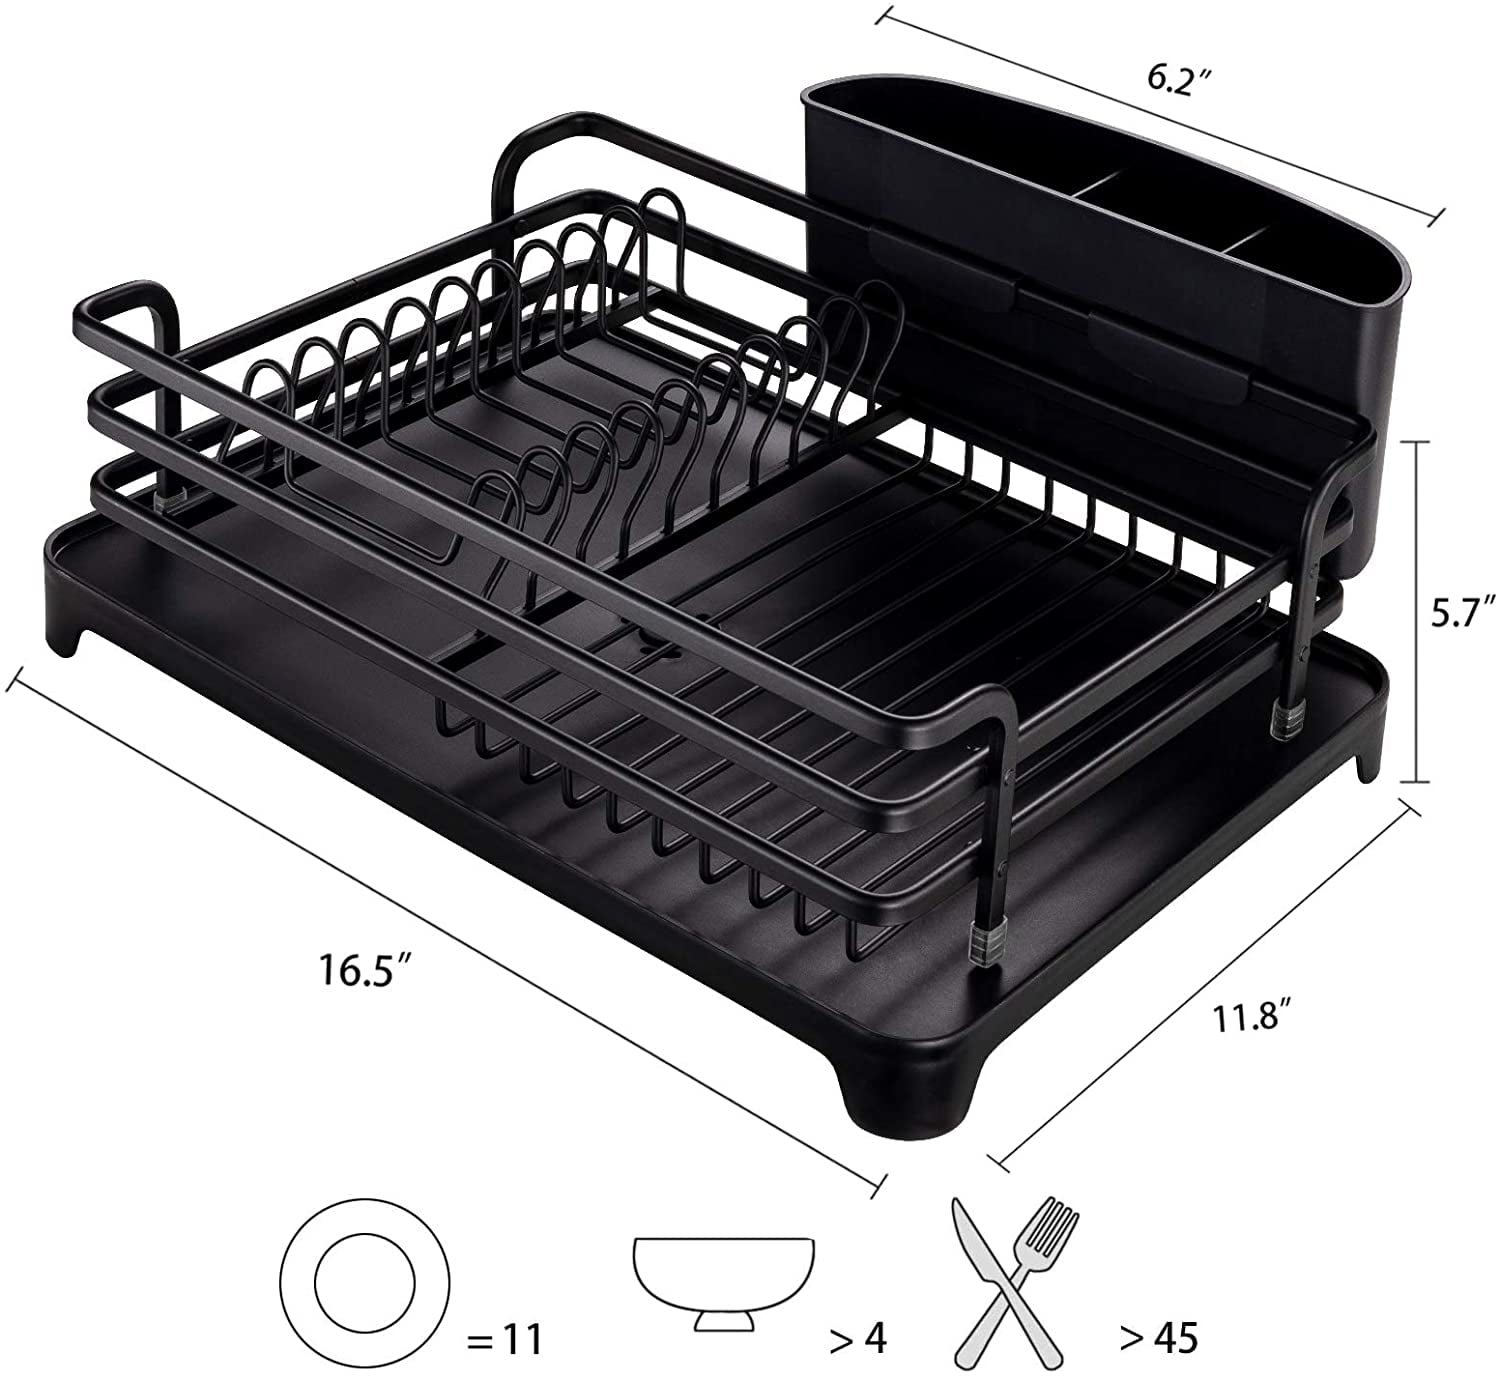 Lyellfe Dish Drying Rack, Rust-Proof Dish Drainer with Drainboard Utensil  Cup Holder, Black Iron Dish Rack and Drainboard Set for Kitchen Counter